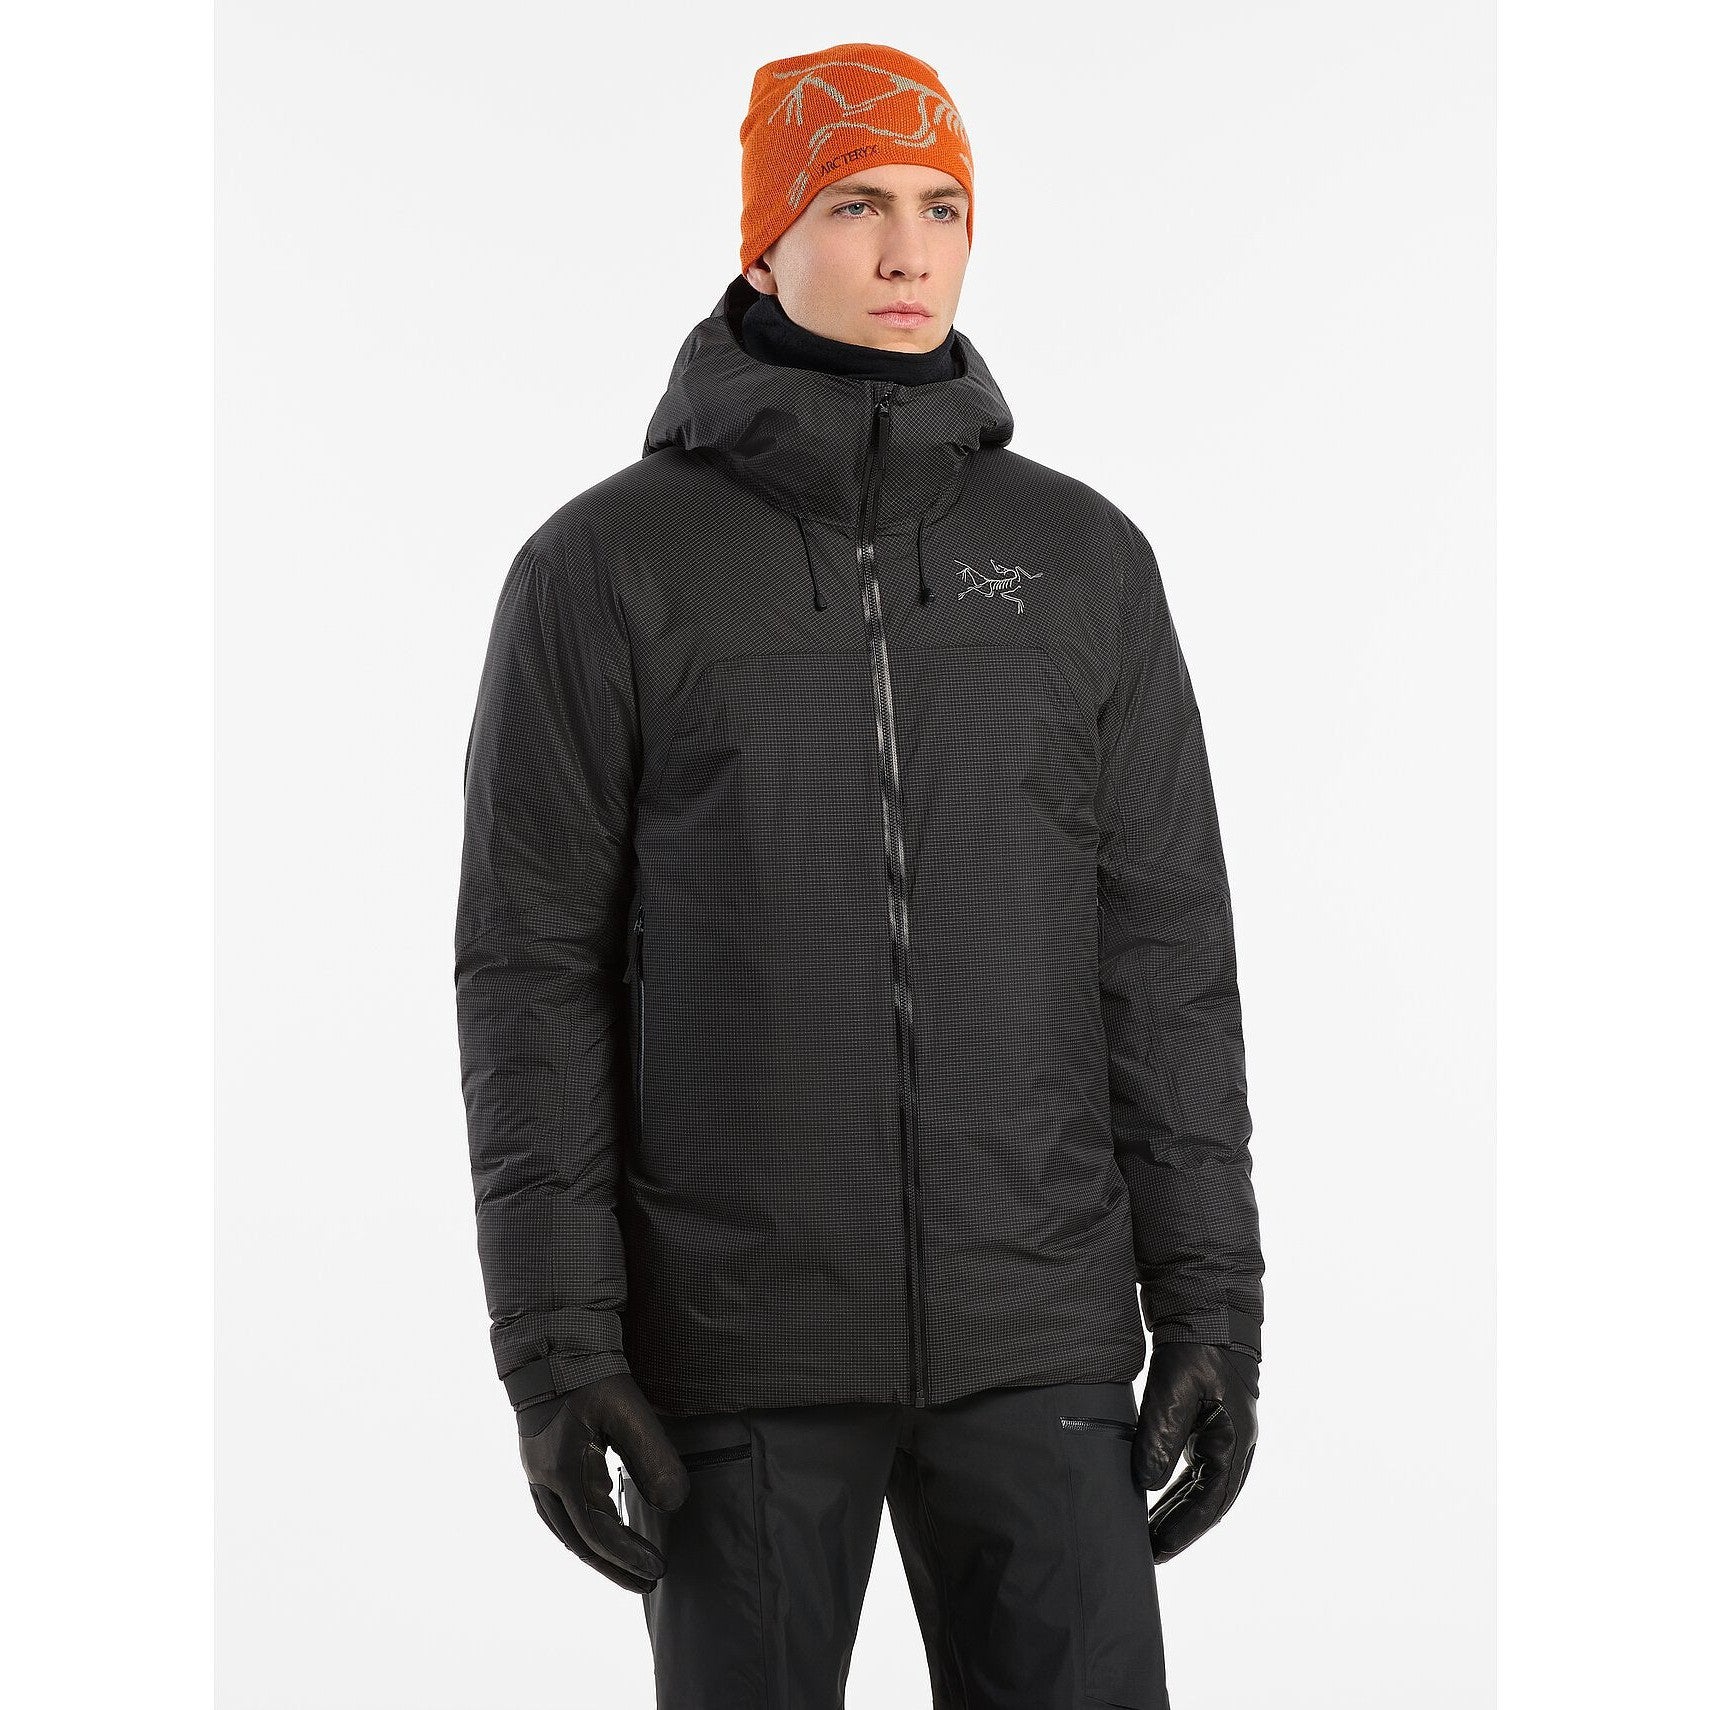 Rush-Insulated-Jacket-Black-Front-View.jpg